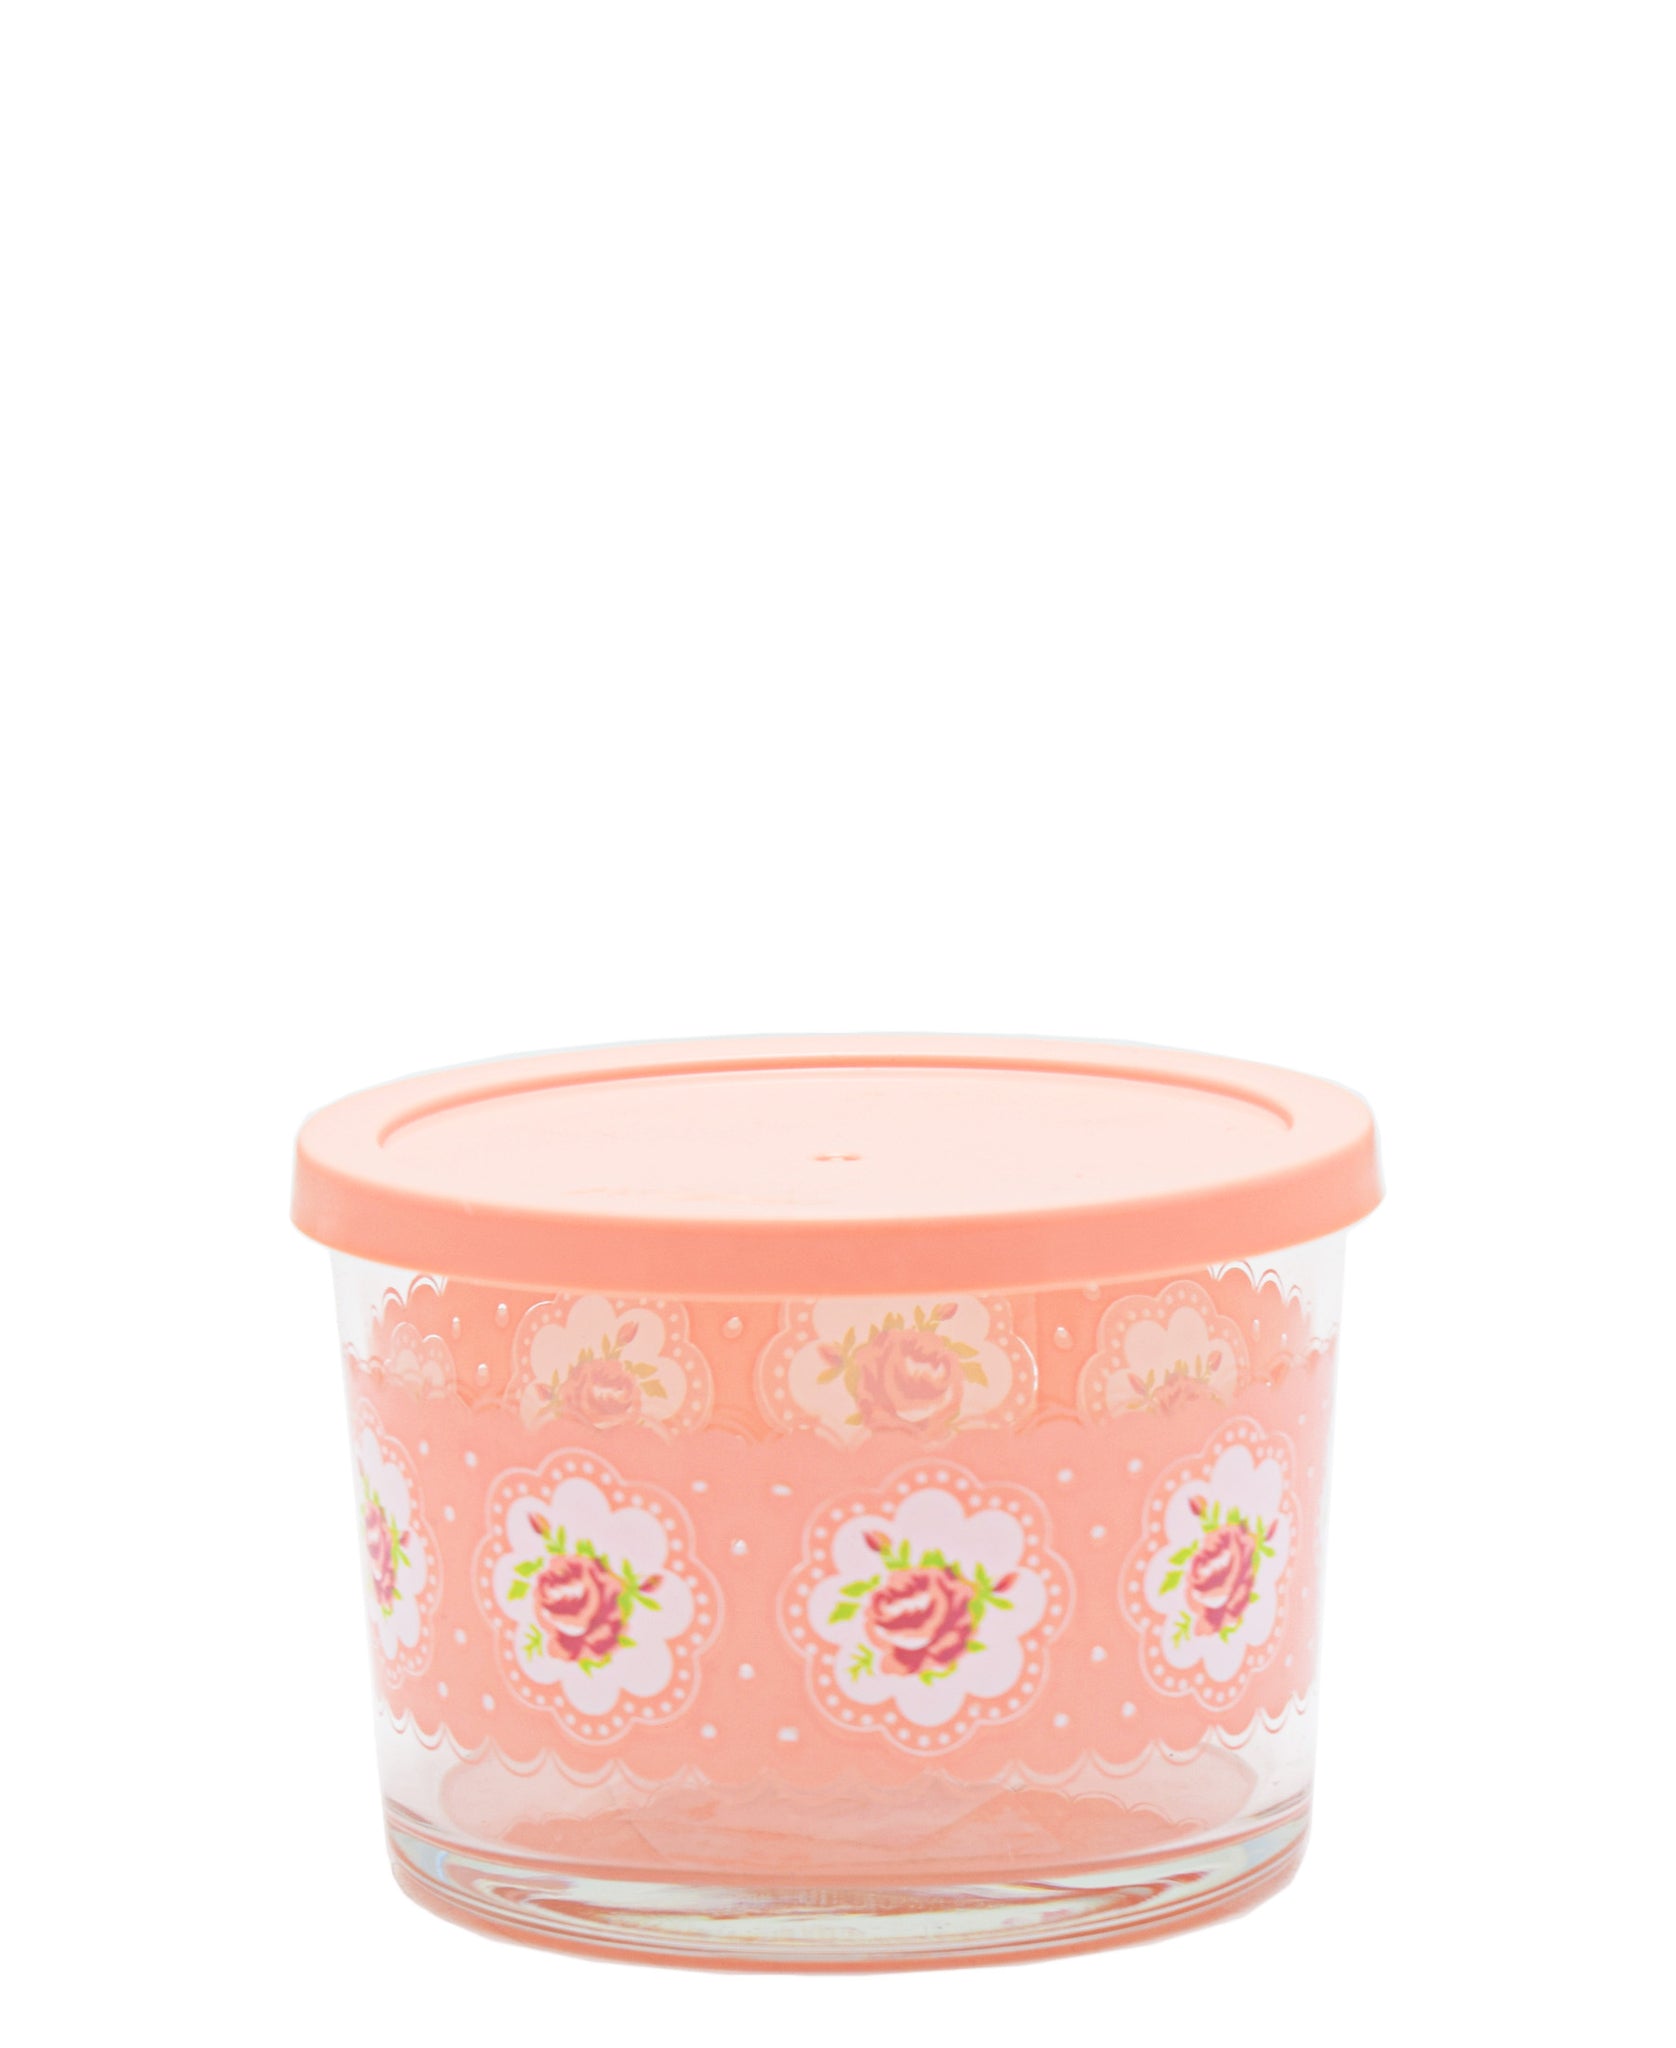 LAV 240ml Bowl With Lid - Pink